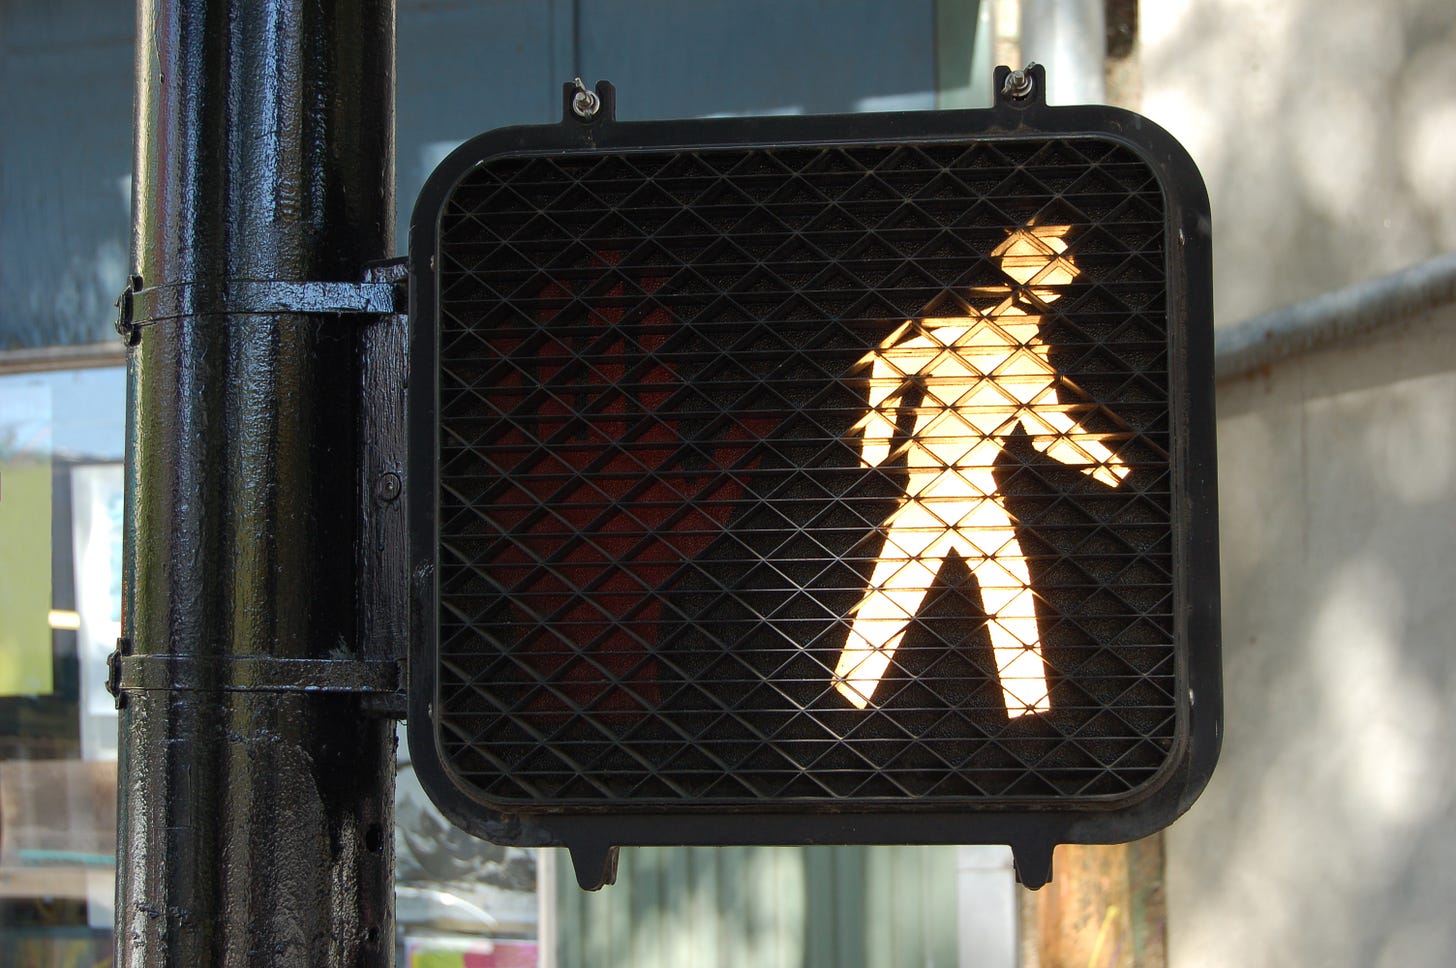 An activated pedestrian walk sign with illuminated person walking